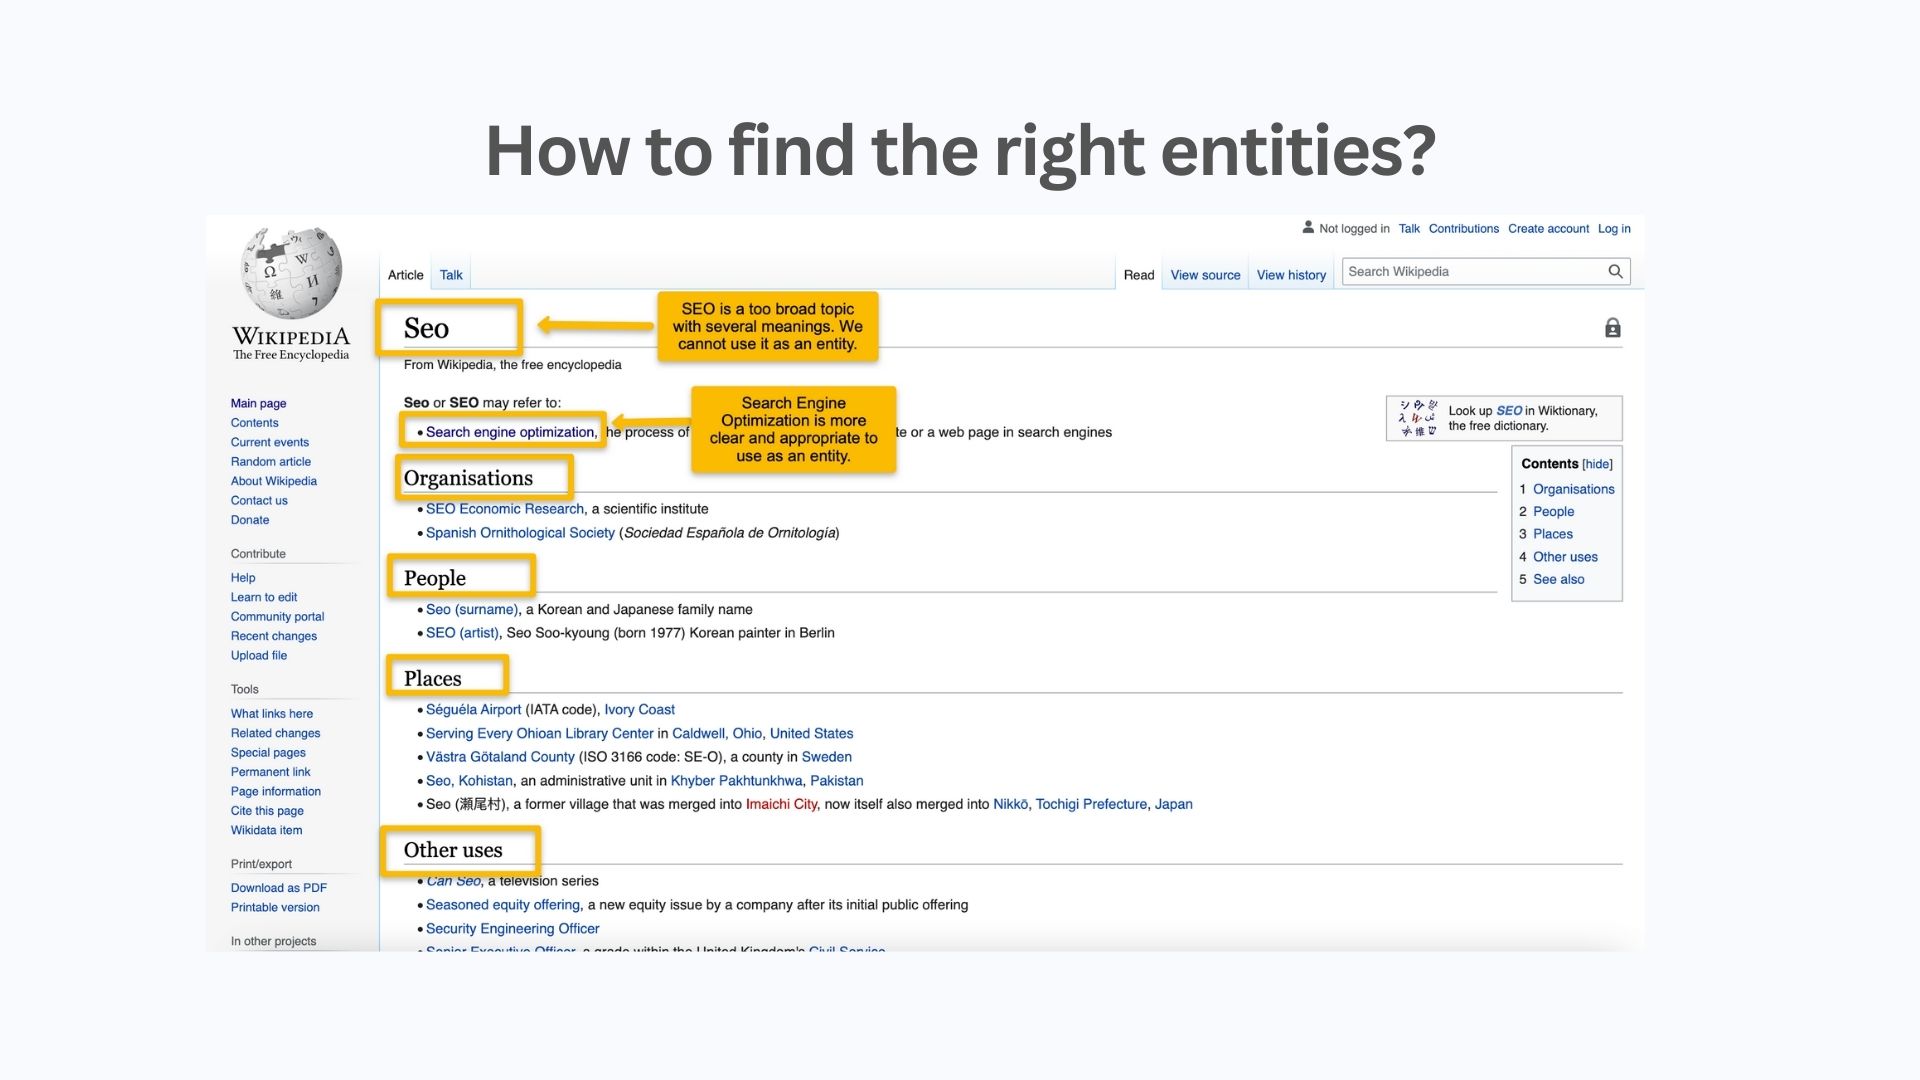 how to find main topic entity from wikipedia